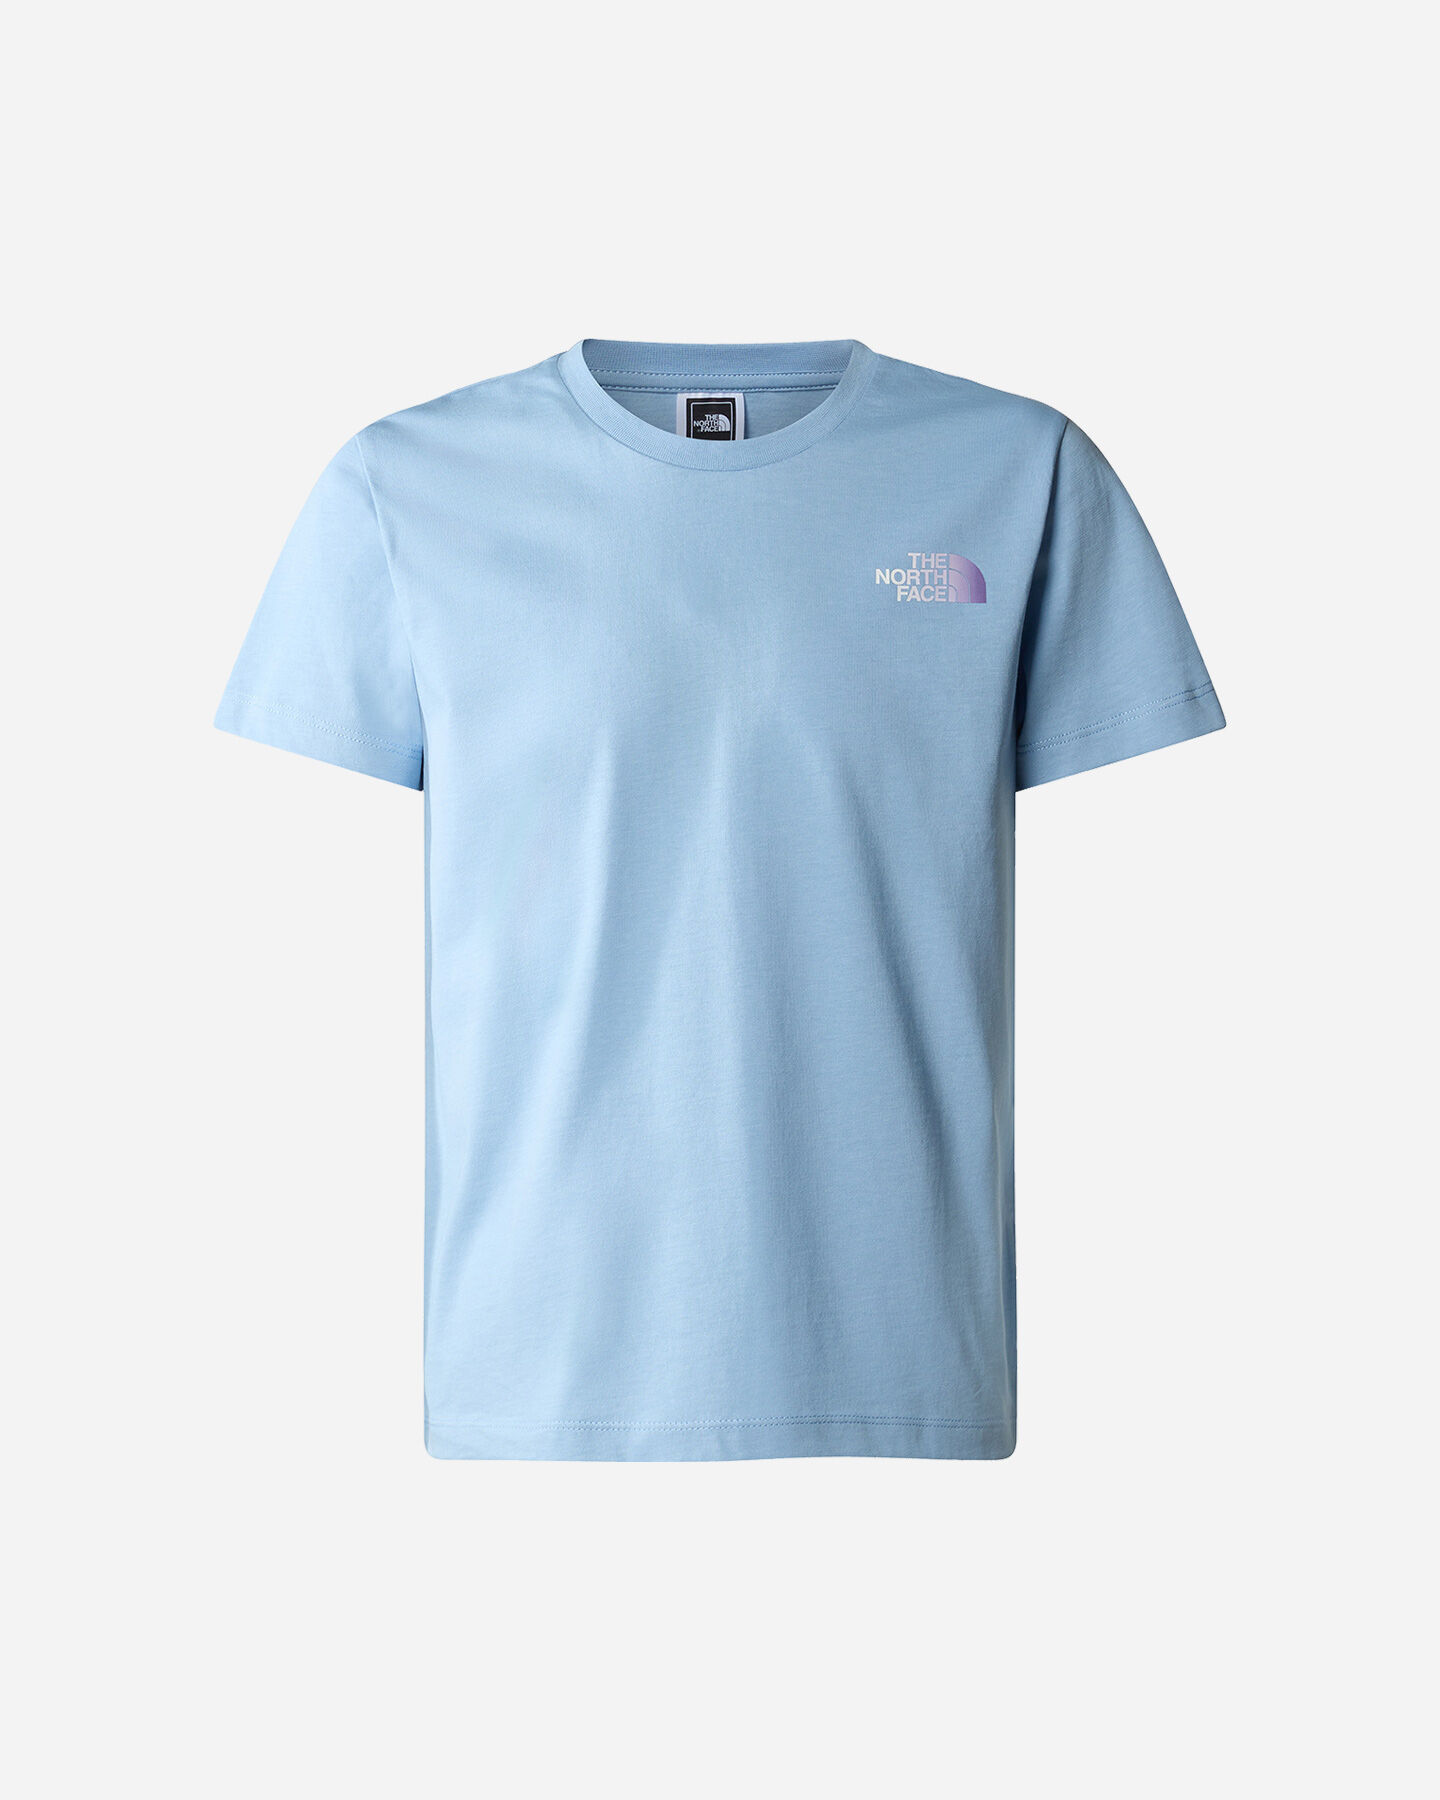  T-Shirt THE NORTH FACE RELAXED GRAPHIC JR S5651191|QEO|S scatto 0